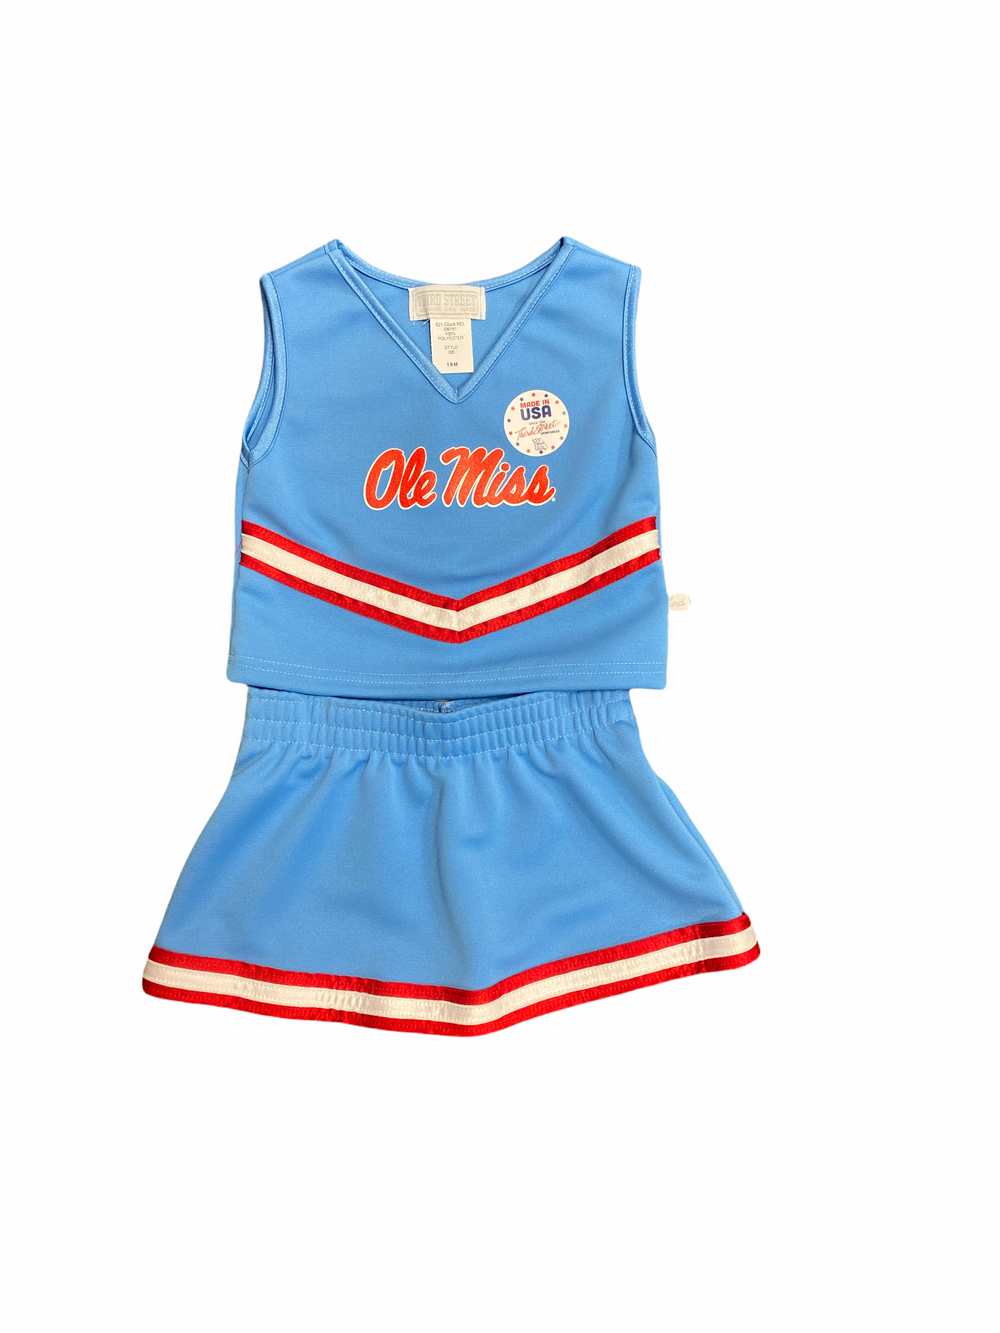 Third Street Ole Miss Powder Blue Cheer Outfit for Kids